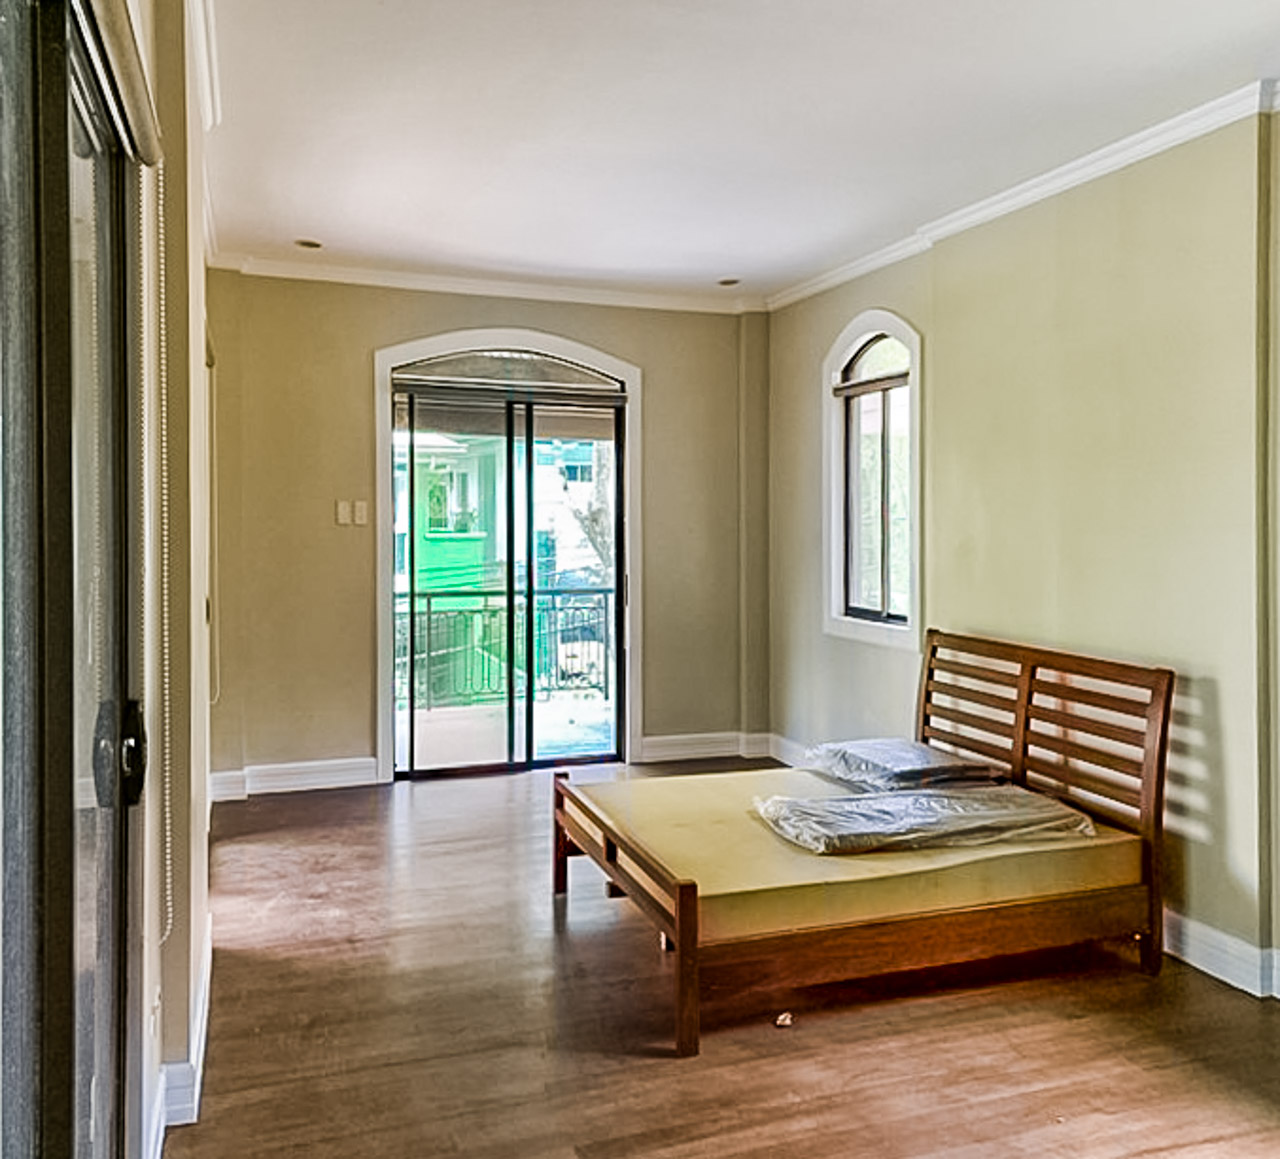 SRBML66 Renovated 4 Bedroom House for Sale in Maria Luisa Park - 12